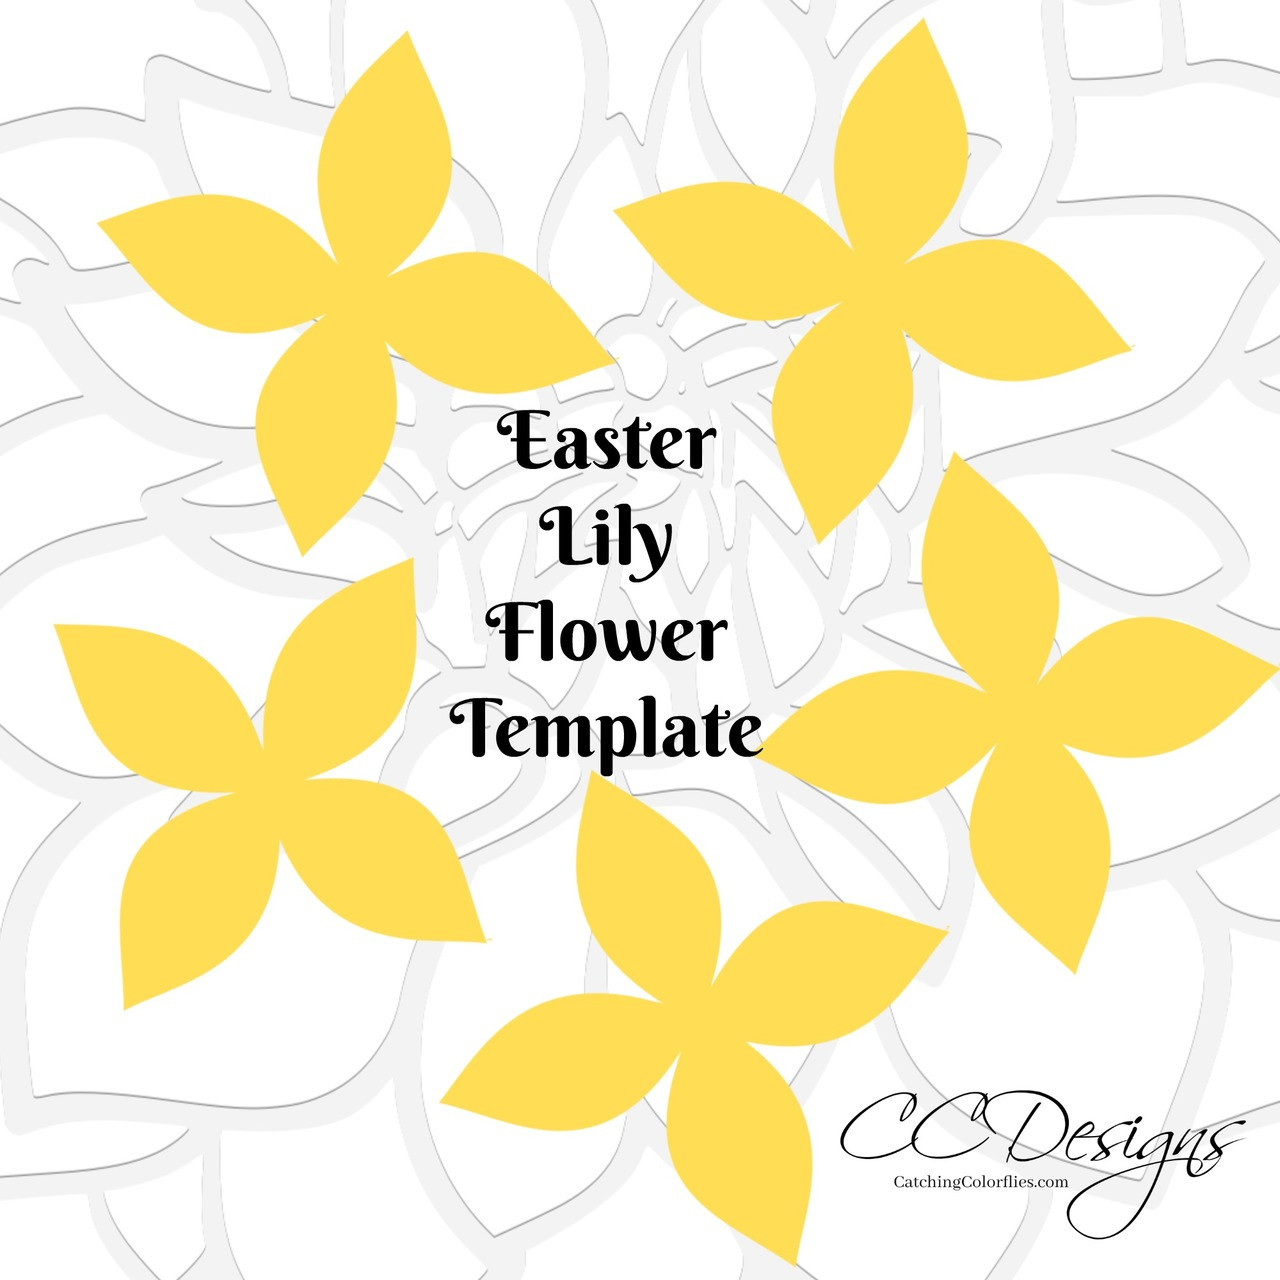 Easter Lily Flower Templates - Catching Colorflies